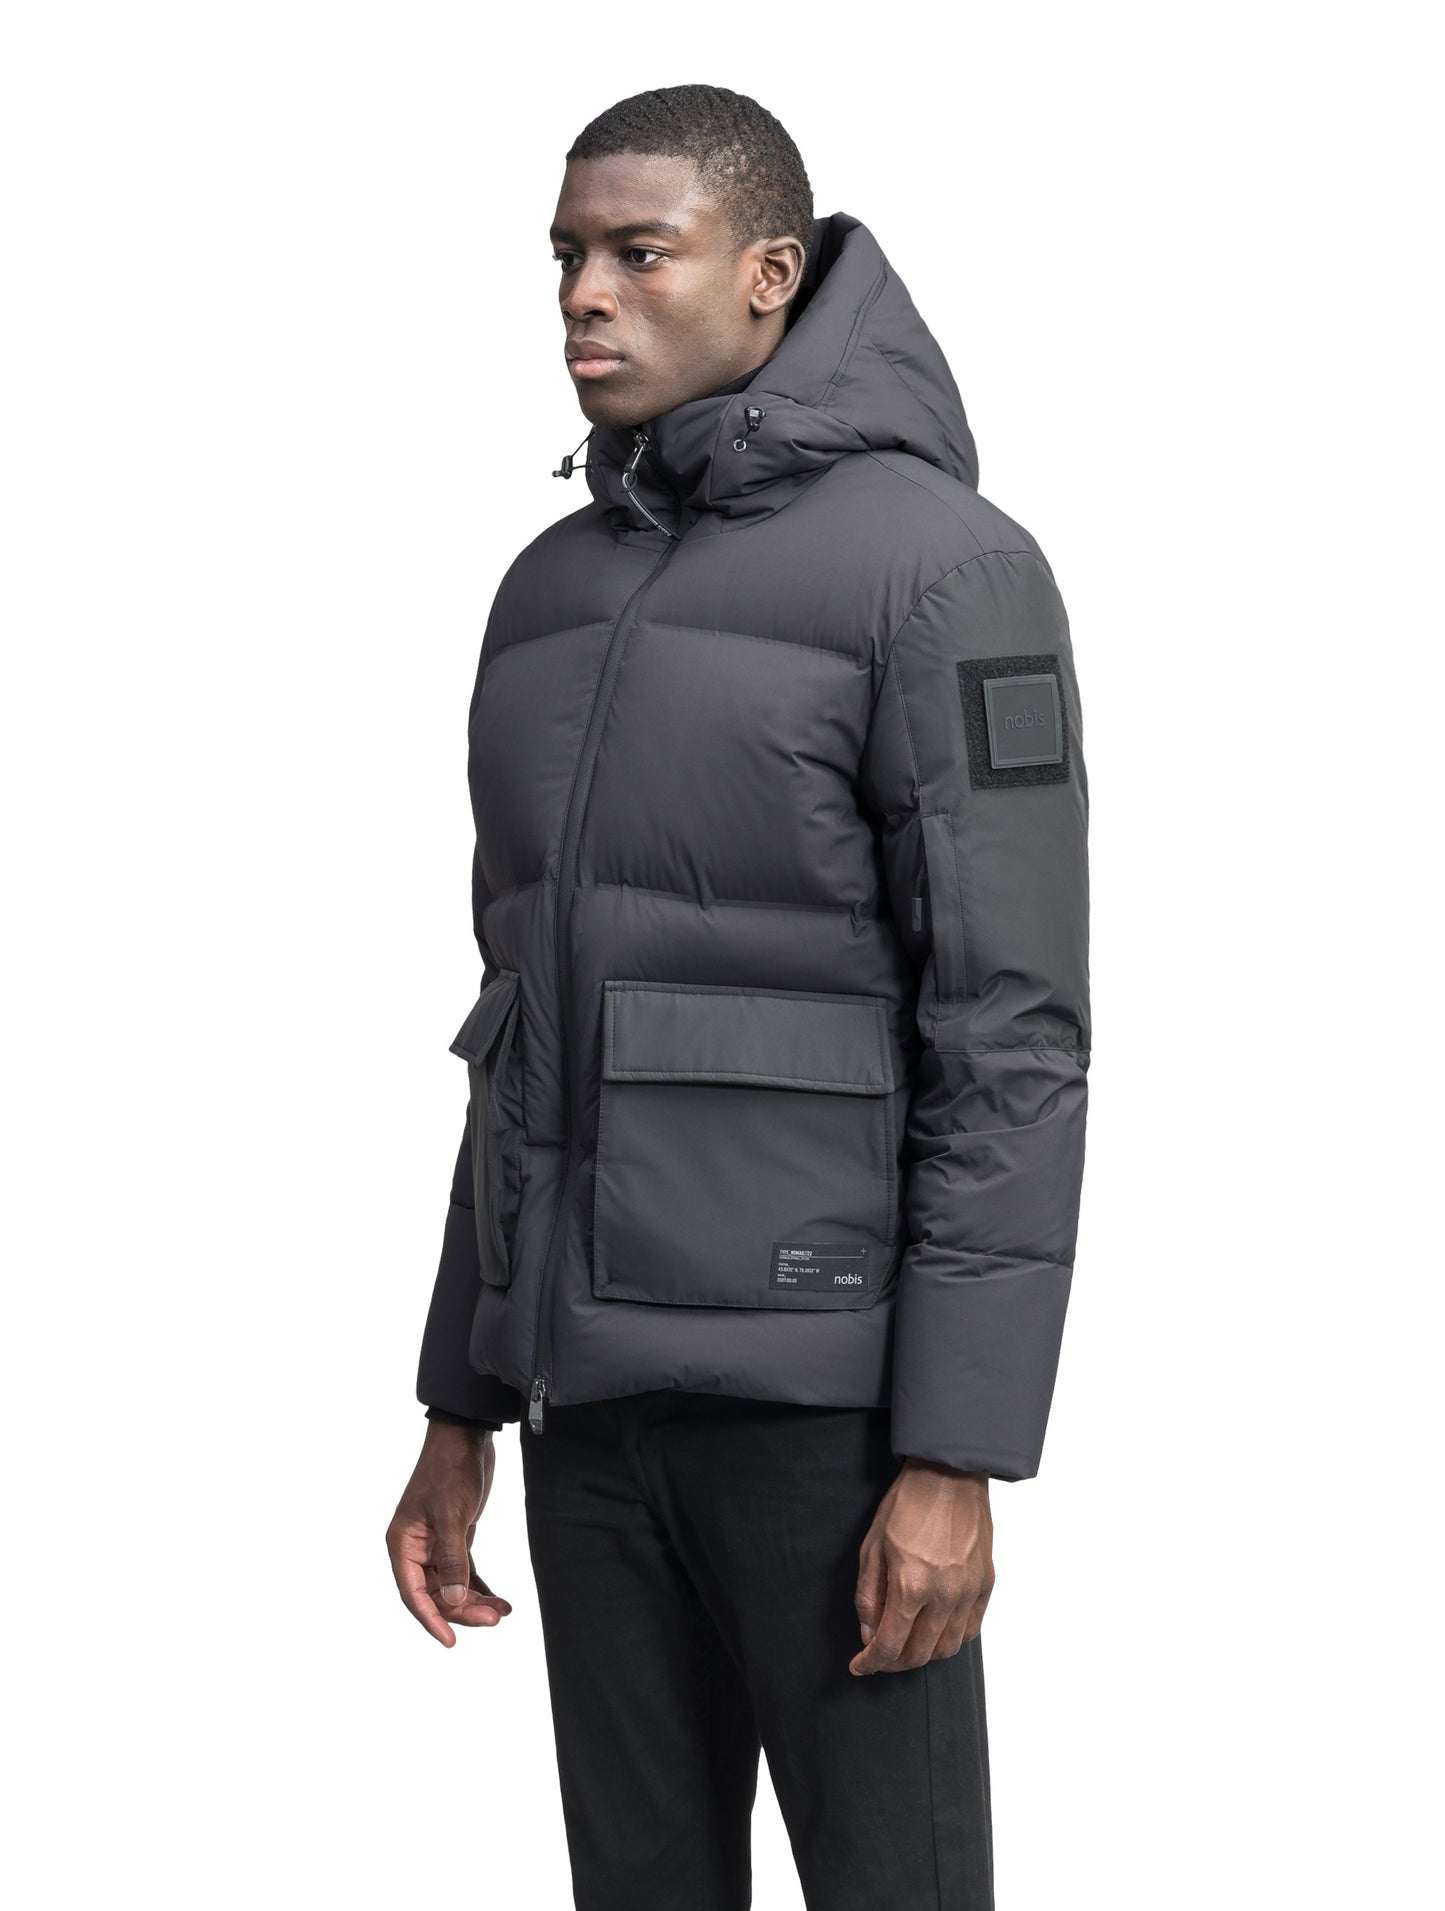 Supra Men's Performance Puffer in hip length, Technical Taffeta and 3-Ply Micro Denier fabrication, Premium Canadian White Duck Down insulation, non-removable down filled hood, centre front two-way zipper, flap pockets at waist, and zipper pocket at left bicep, in Black